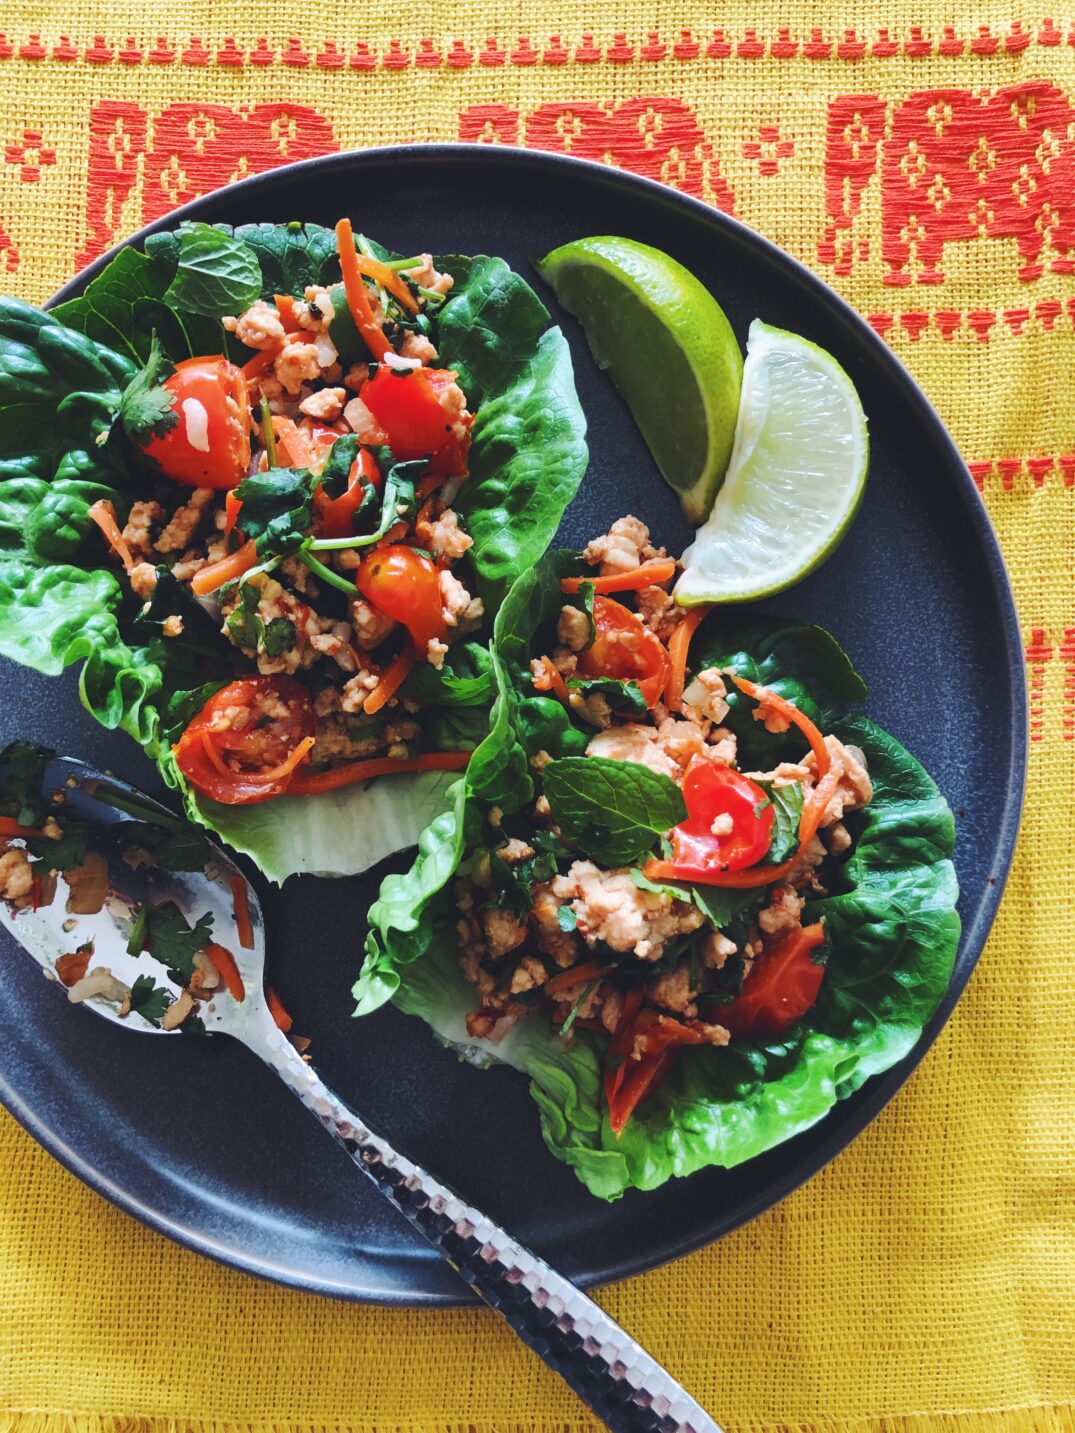 Larb Gai - Spicy, Sour and Slightly Sweet Thai Minced Chicken Salad with Chile + Fresh Herbs